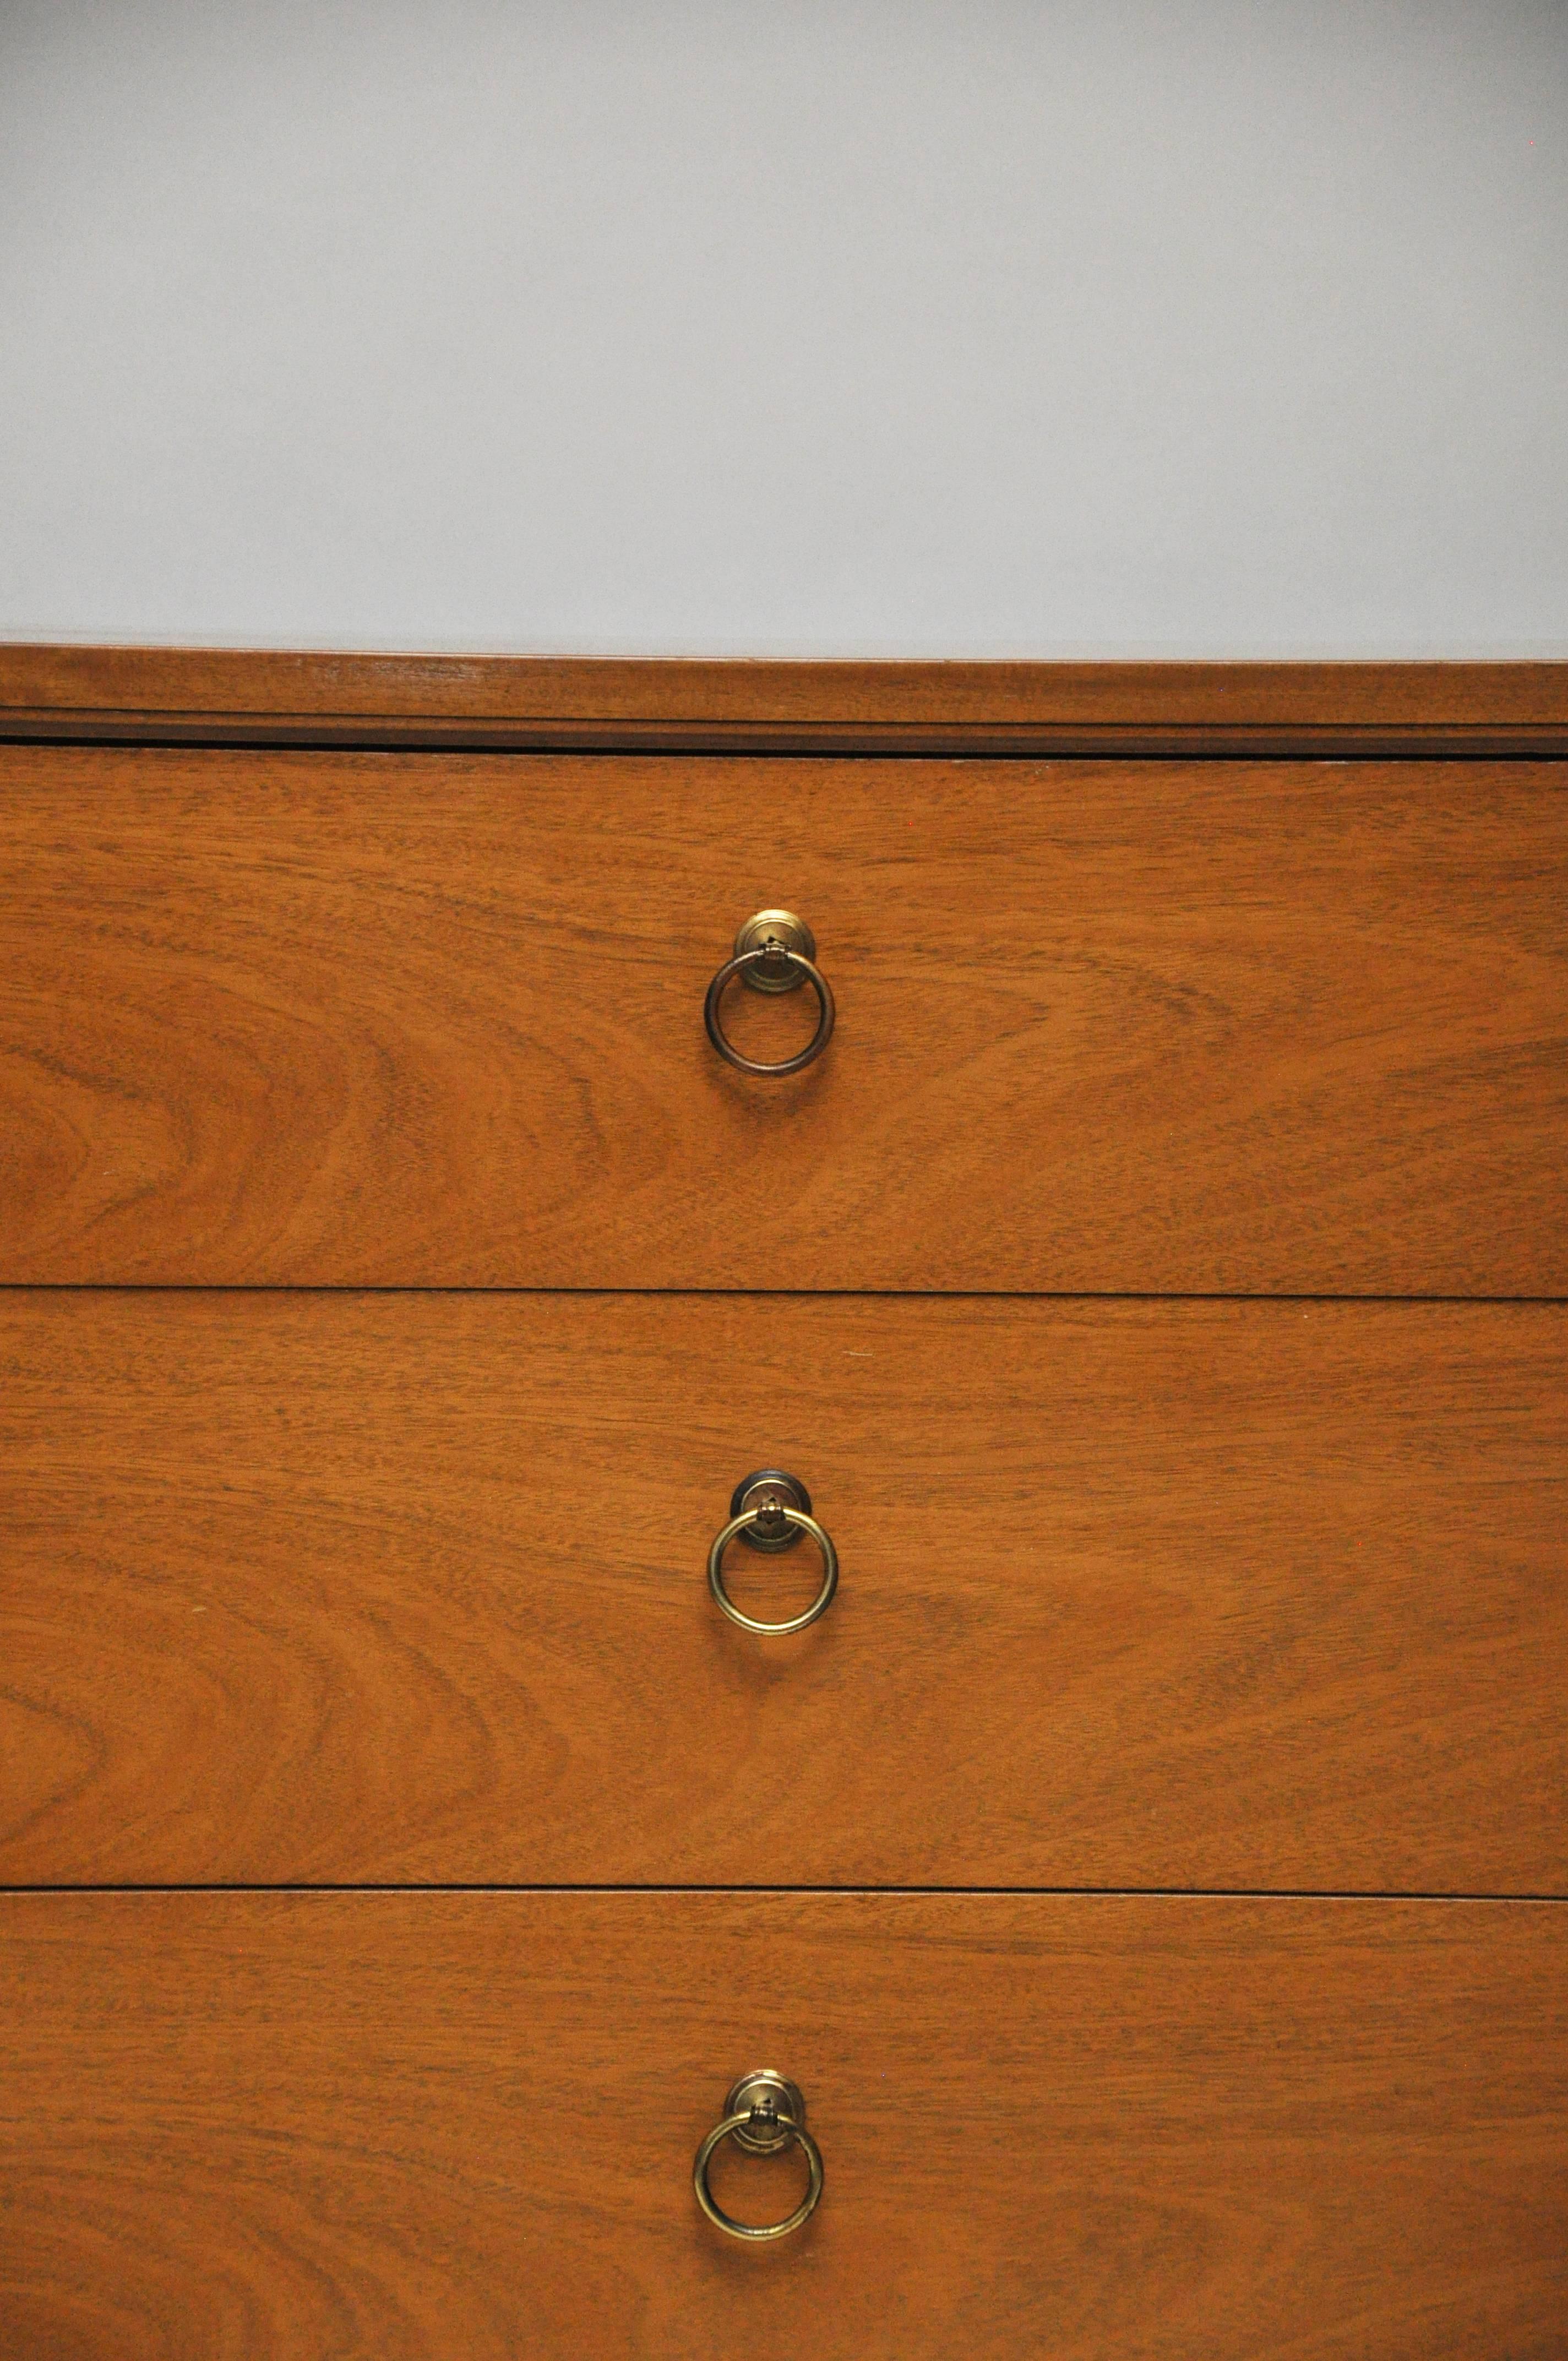 Kent-Coffey three-drawer small dresser with brass hardware. This is made of light walnut veneer. Chest is on tapered legs with brass strip detail.